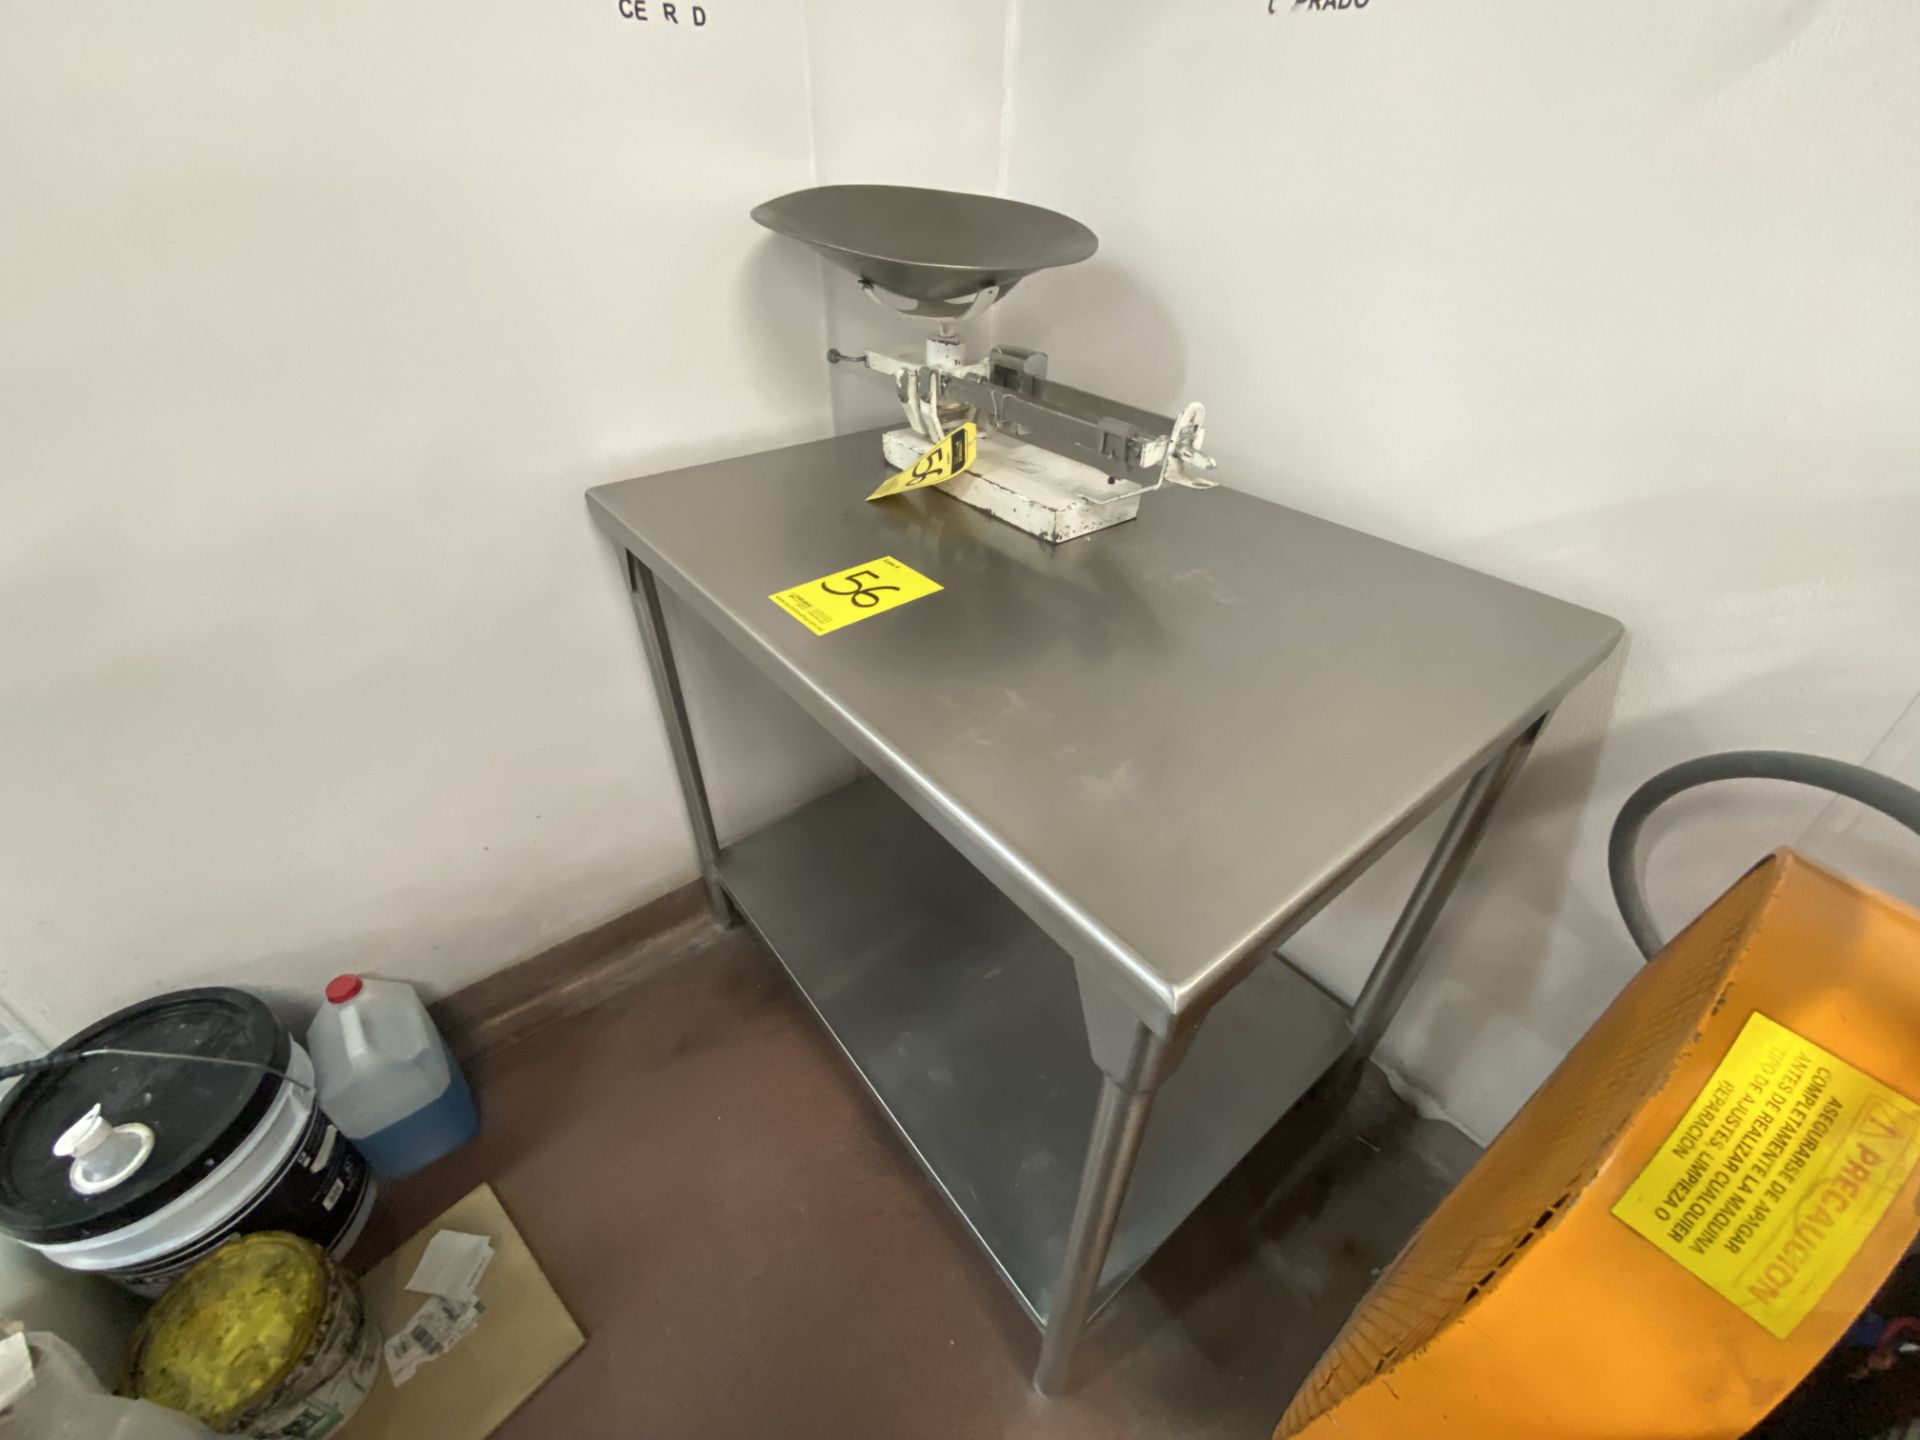 1 Stainless steel work table measures 1.00 x 0.70 x 0.90 meters; Includes balance scale - Image 4 of 5